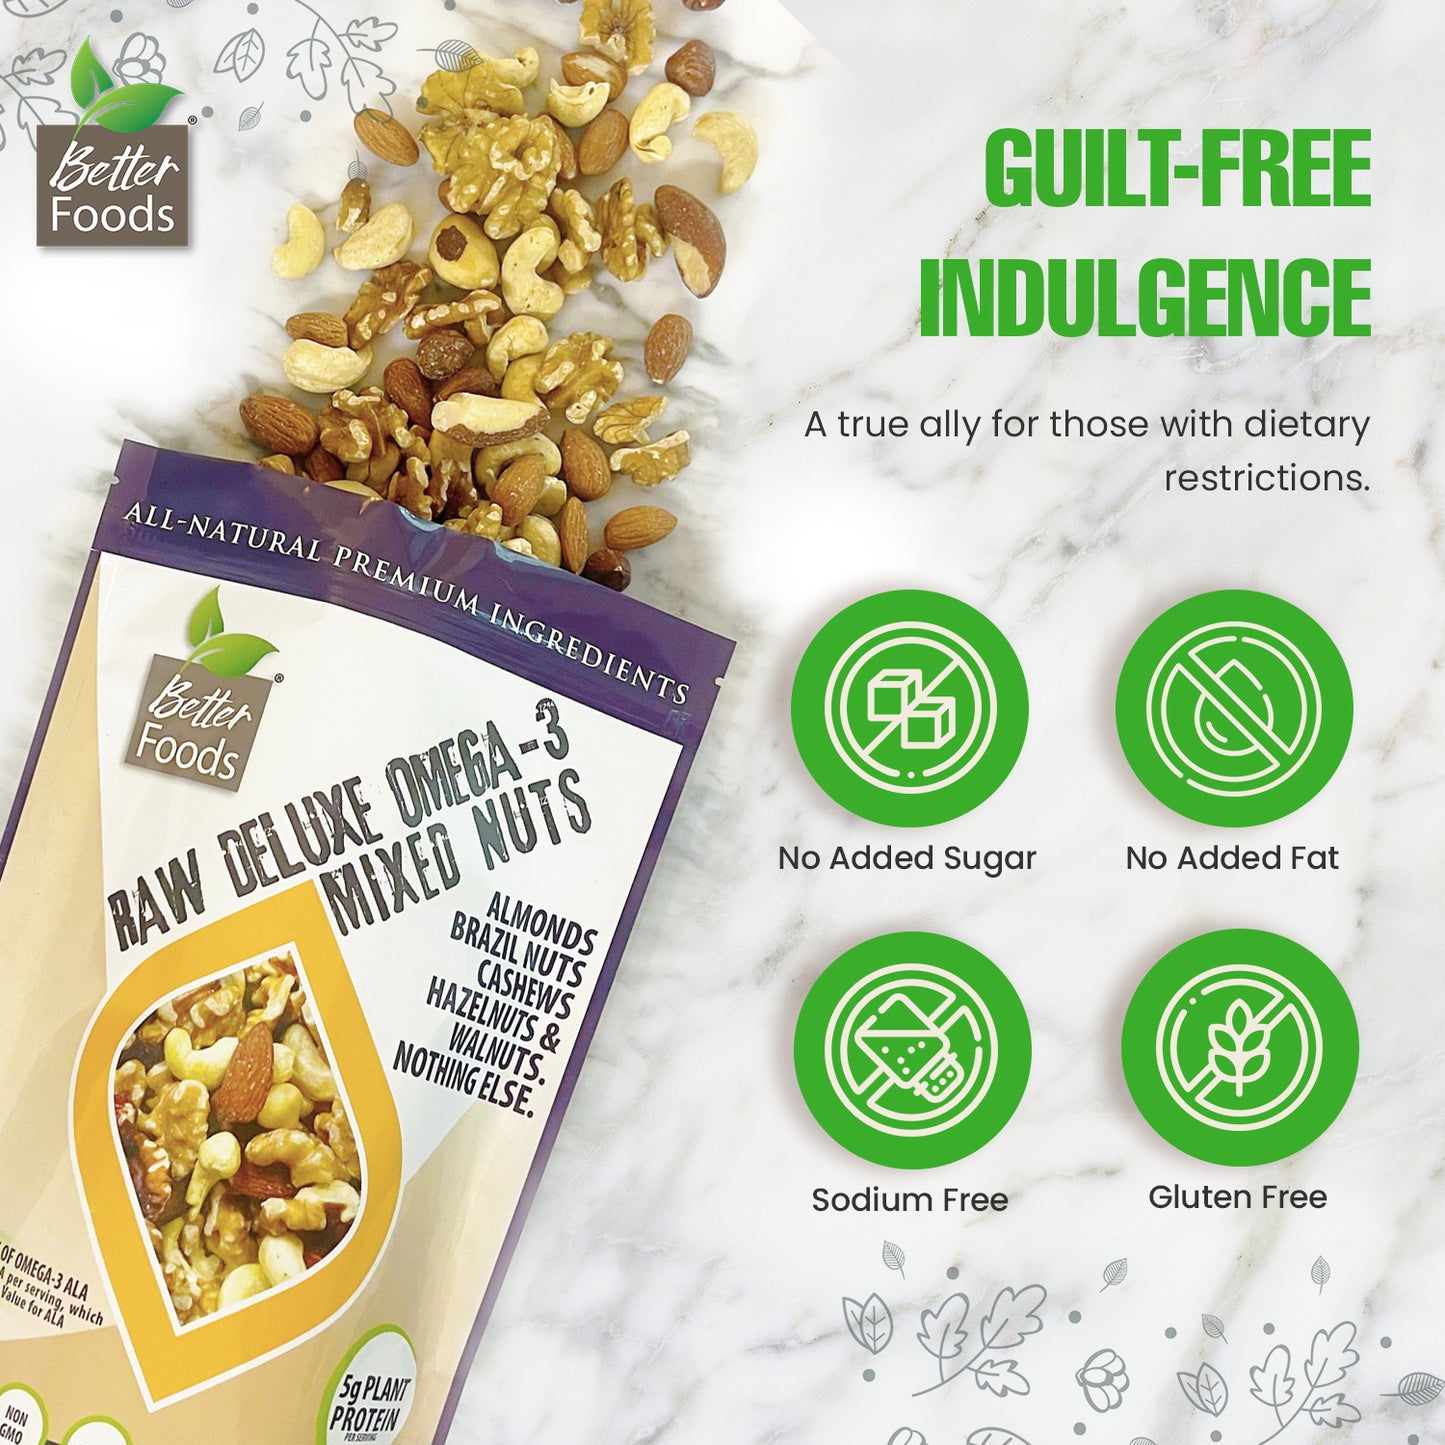 Raw Unsalted Deluxe Omega 3 Mixed Nuts